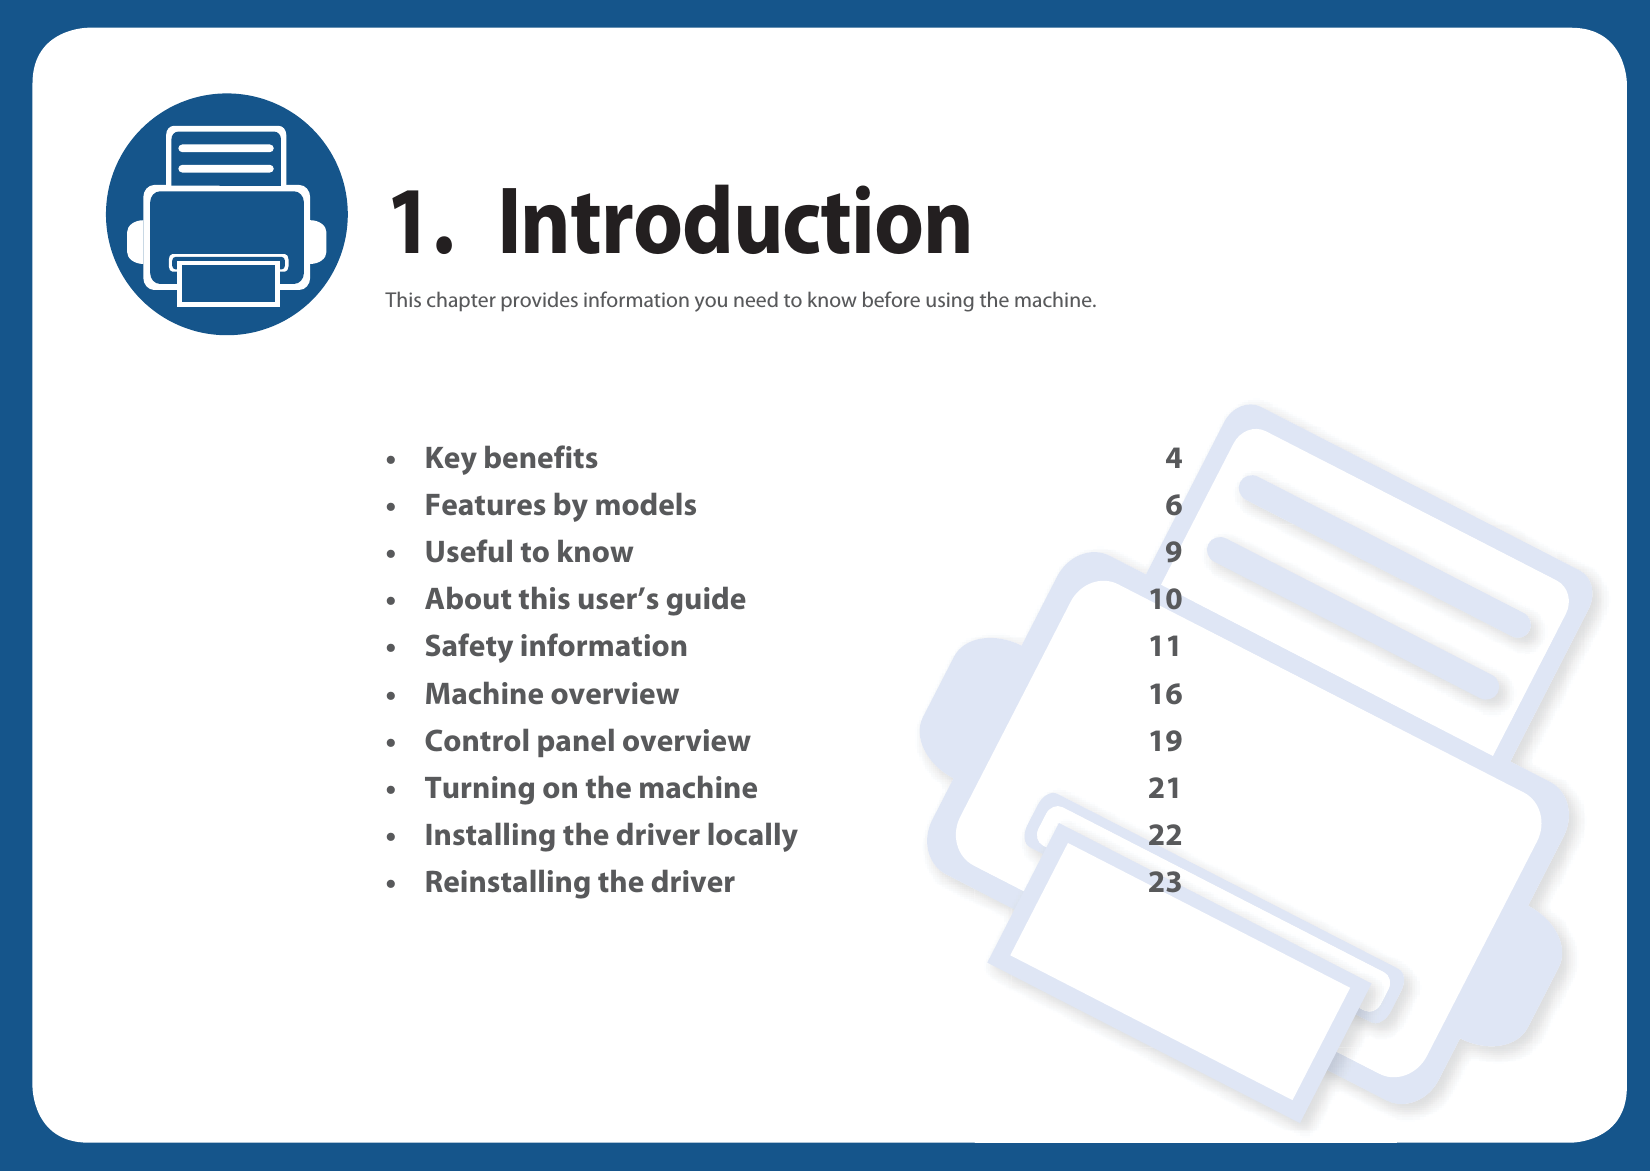 1. IntroductionThis chapter provides information you need to know before using the machine.•Key benefits 4• Features by models 6• Useful to know 9• About this user’s guide 10• Safety information 11• Machine overview 16• Control panel overview 19• Turning on the machine 21• Installing the driver locally 22• Reinstalling the driver 23